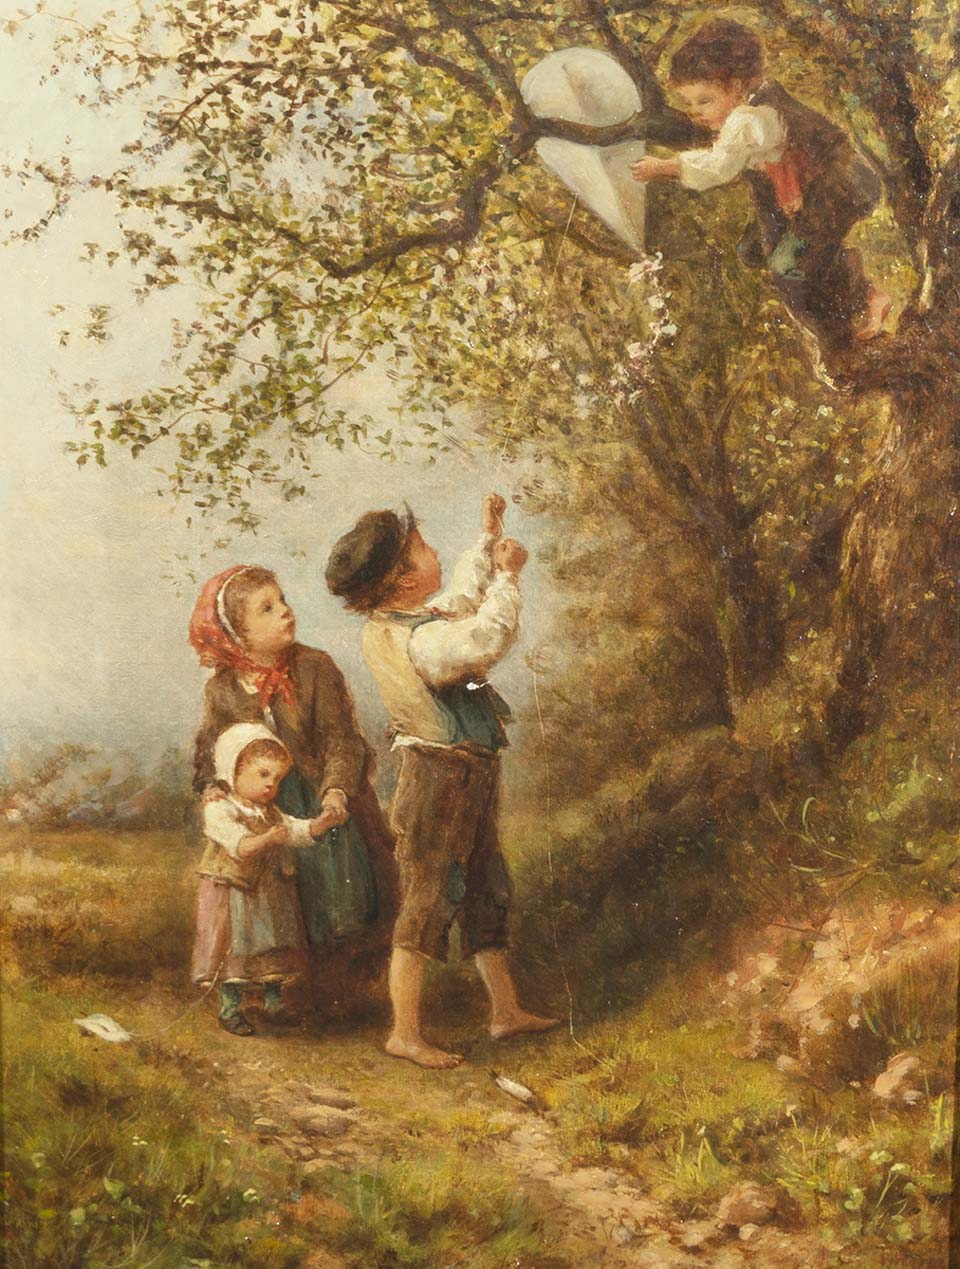 Children getting kite out of a tree